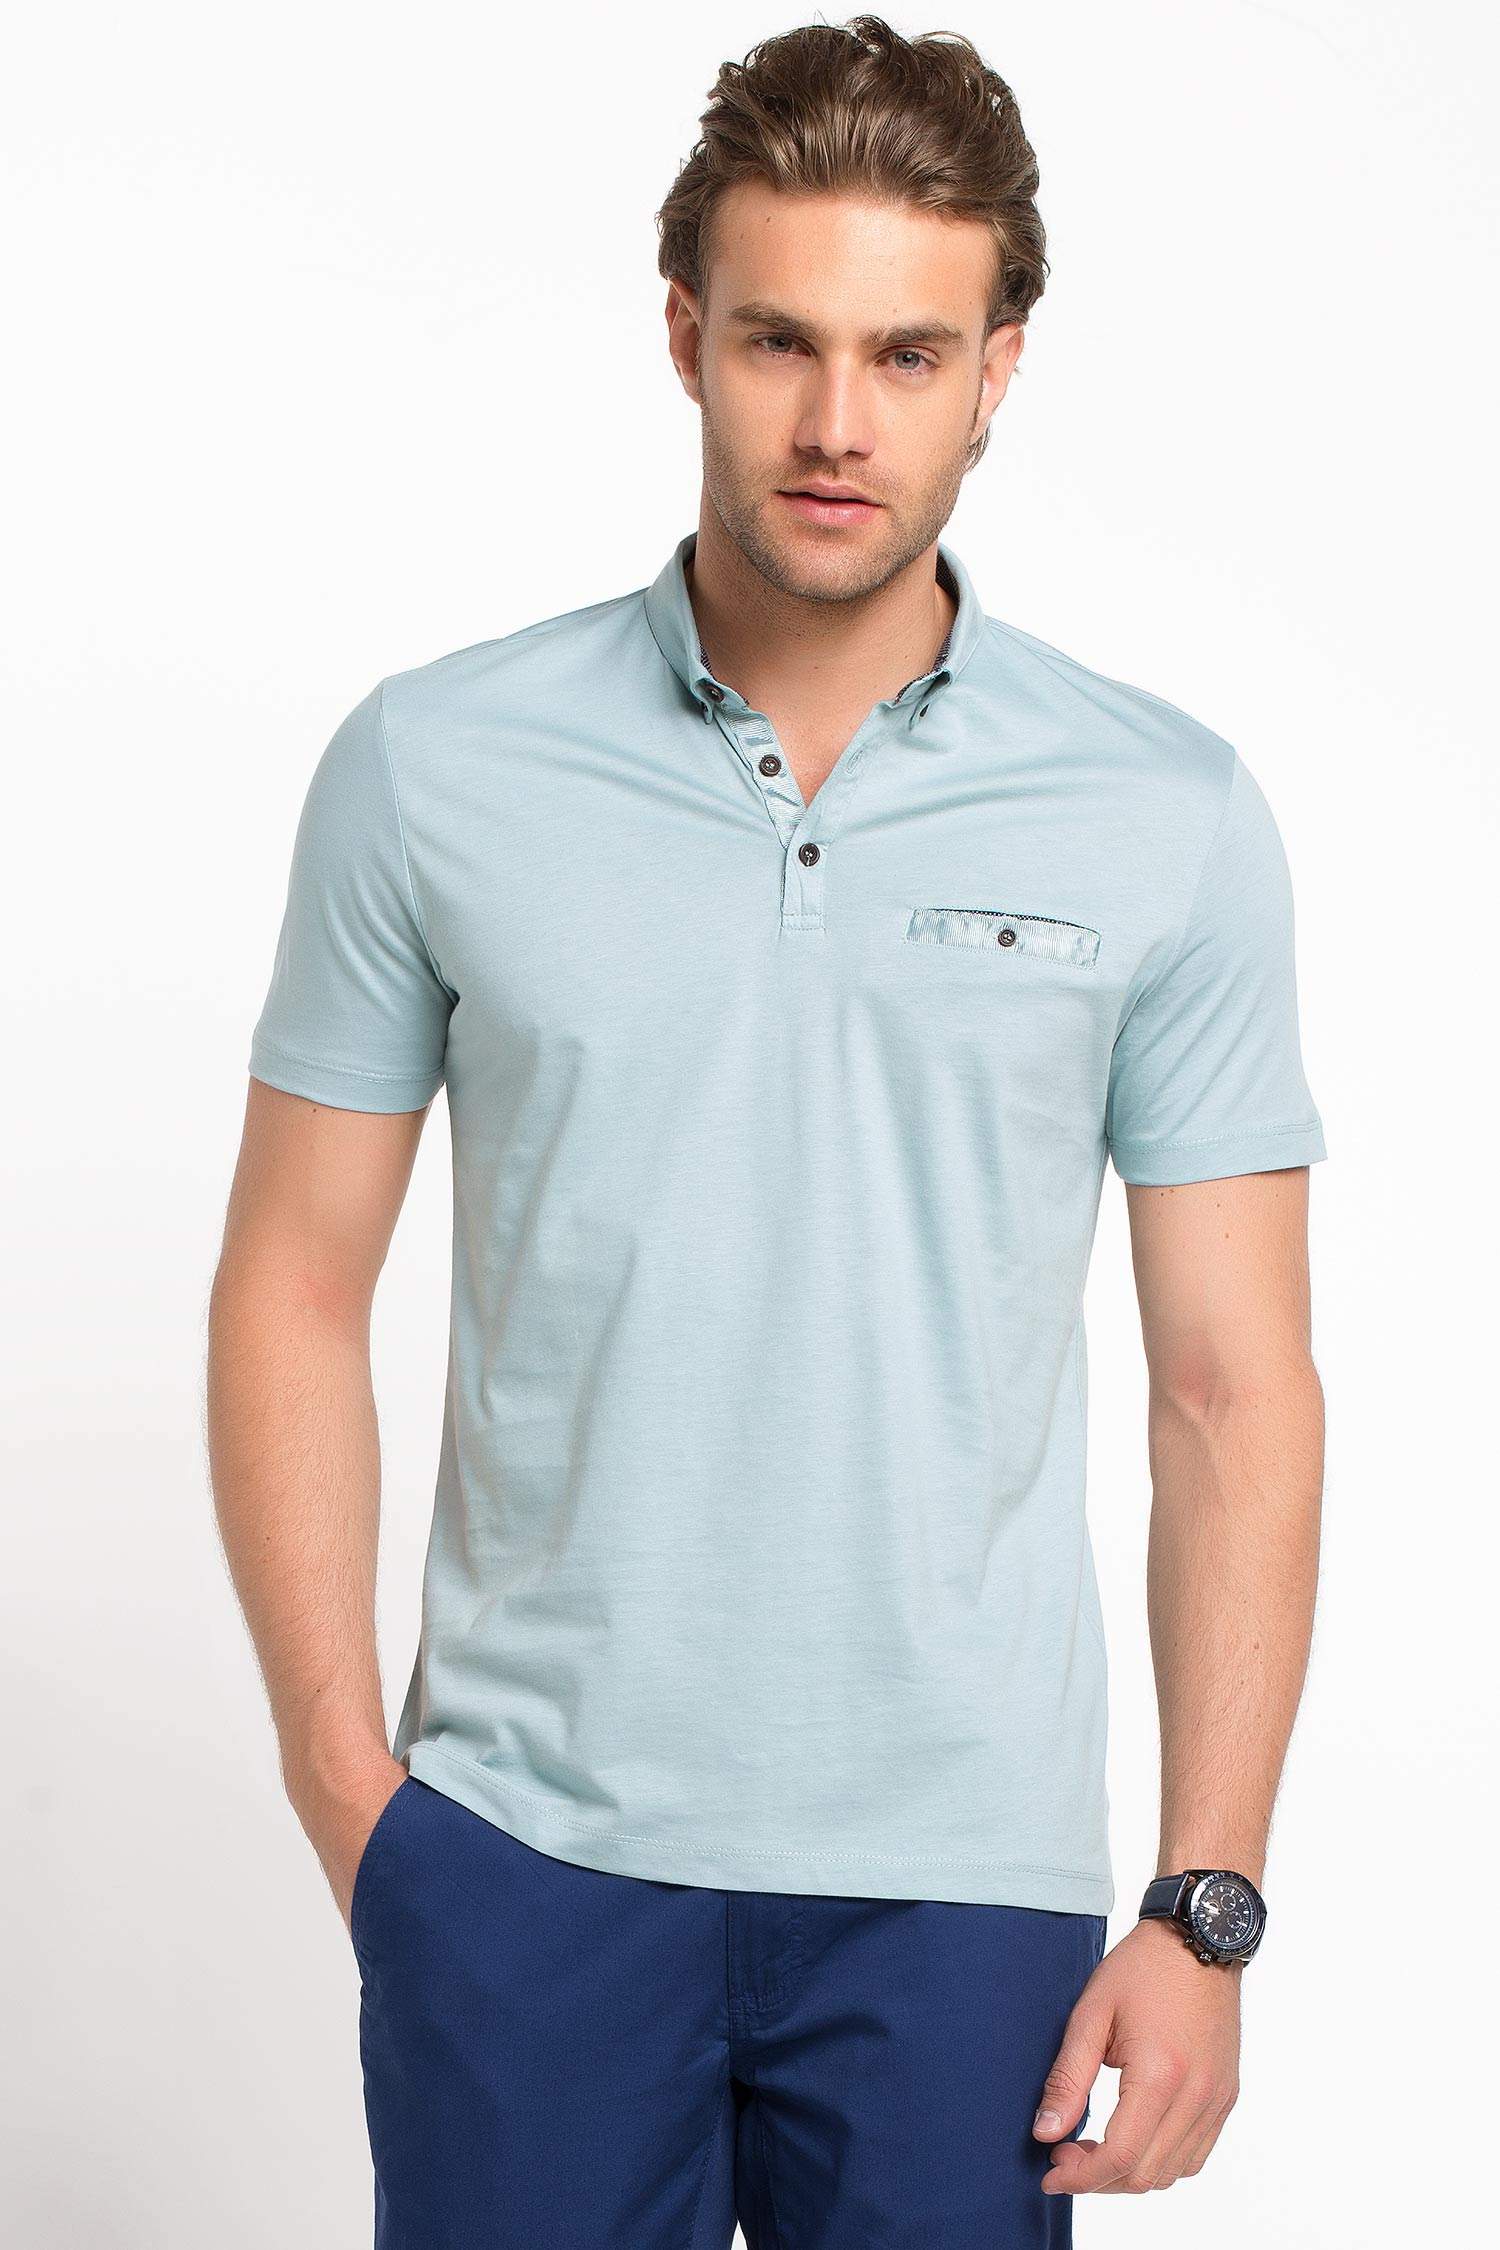 Defacto Merserize Polo T-shirt. 1